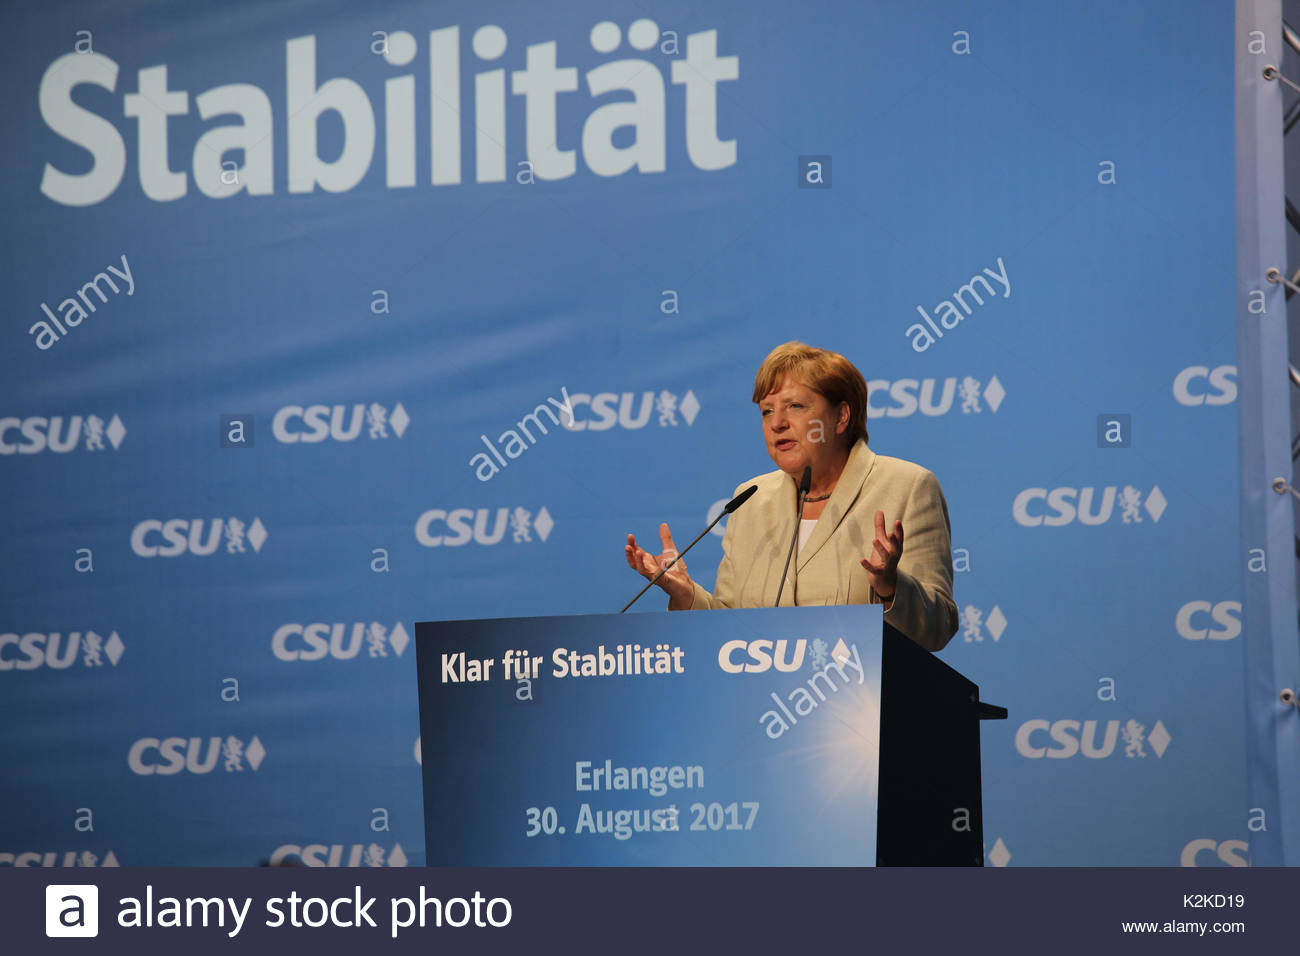 An expressive gesture as Angela Merkel calmly speaks to a large crowd on the campaign trail in the run up to the German election which is taking place on Sunday, September 24.Merkel spoke for over forty minutes and was well received though a small group of protestors tried to interrupt her speech with whistles and catcalls. She and her sister party the Bavarian CSU currently enjoy good ratings in the polls over the SPD and many expect to be returned to office for a fourth term. Stock Photo